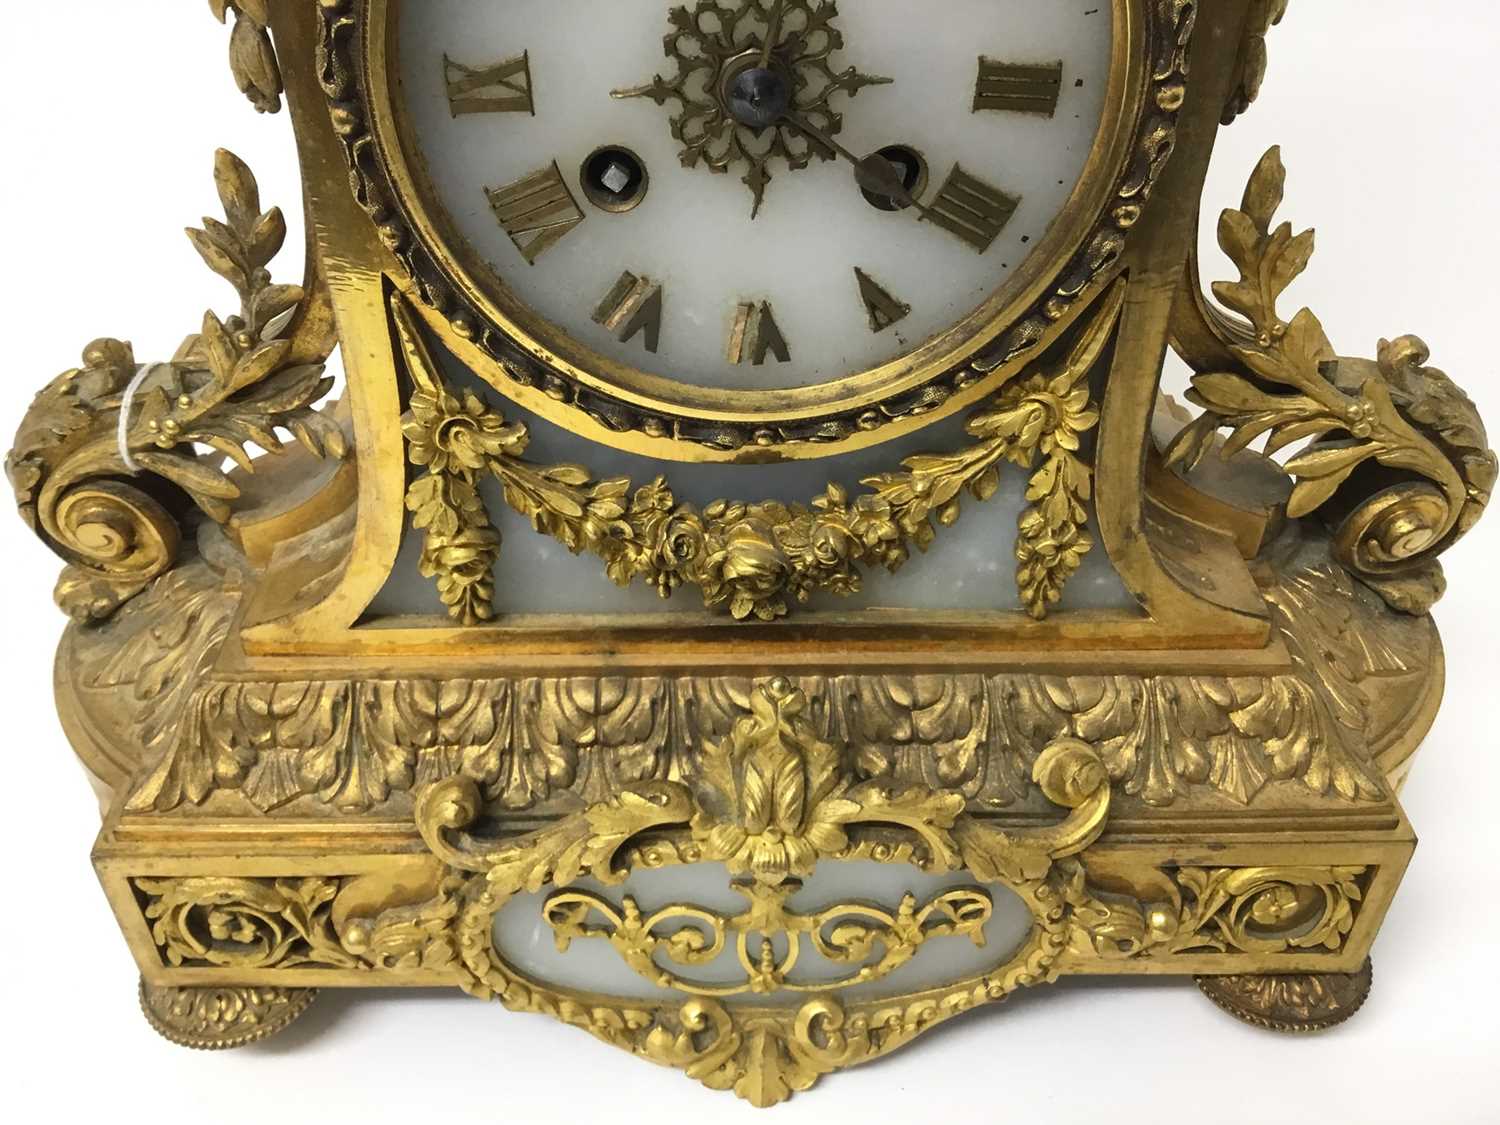 Good quality 19th century French Ormolu and White alabaster mantel clock - Image 4 of 10